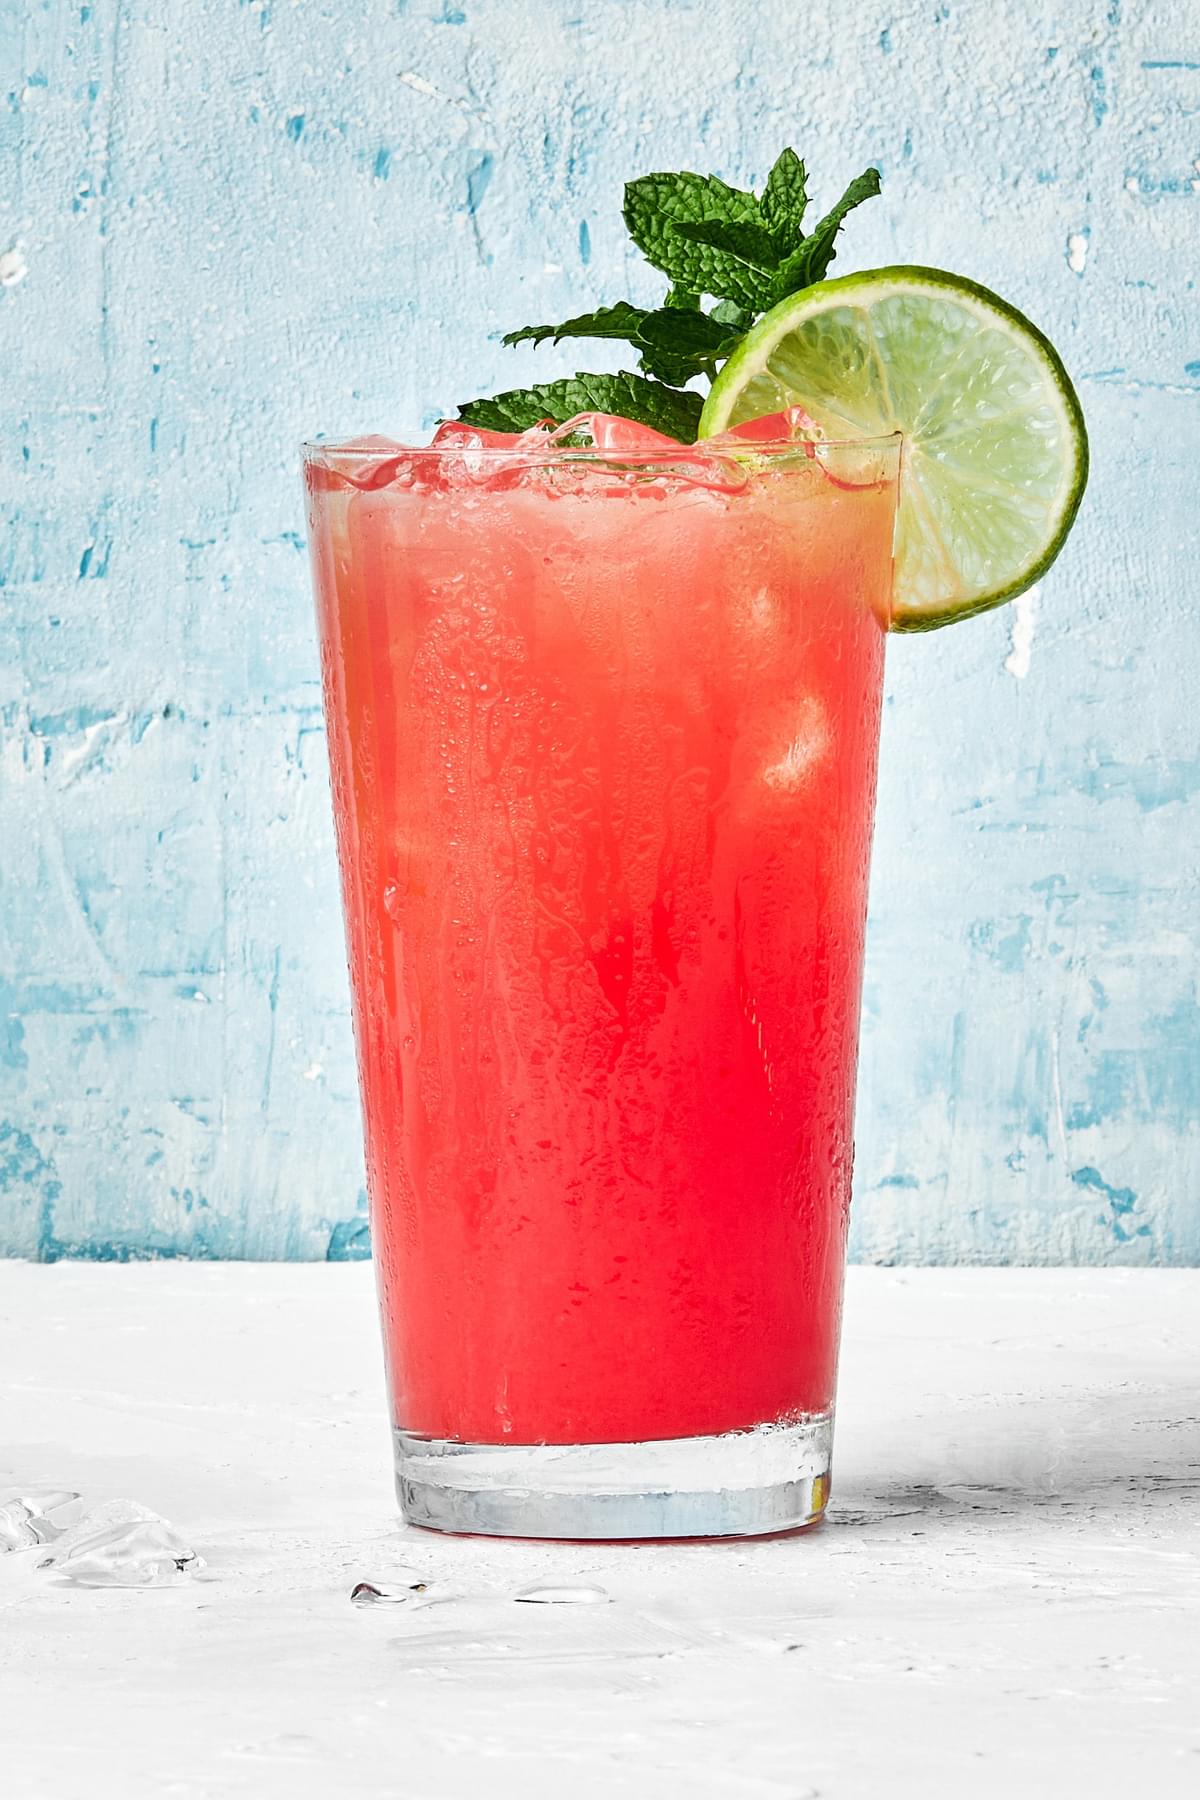 a glass of watermelon aqua fresca served over ice and garnished with fresh mint springs and a lime wedge